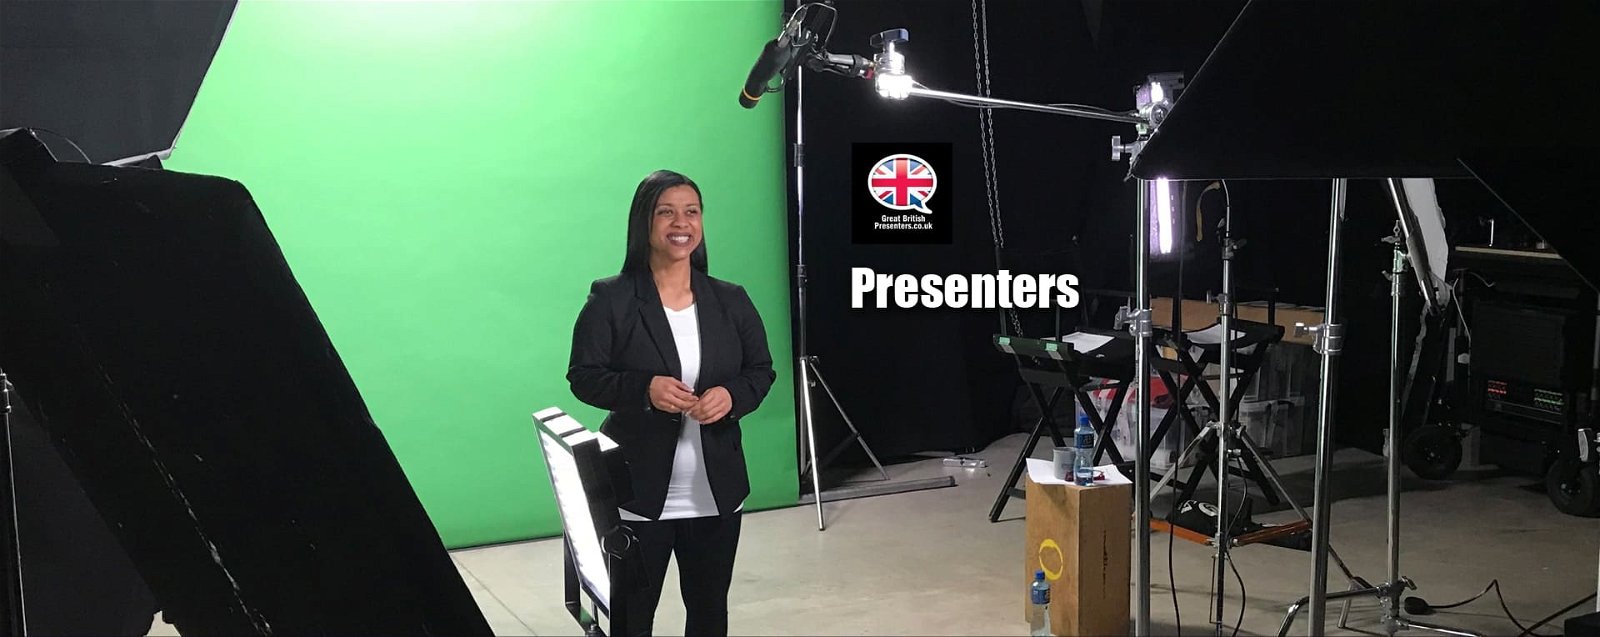 TV Film Video green screen youtube studio location explainers elearning at Great British Presenters-min